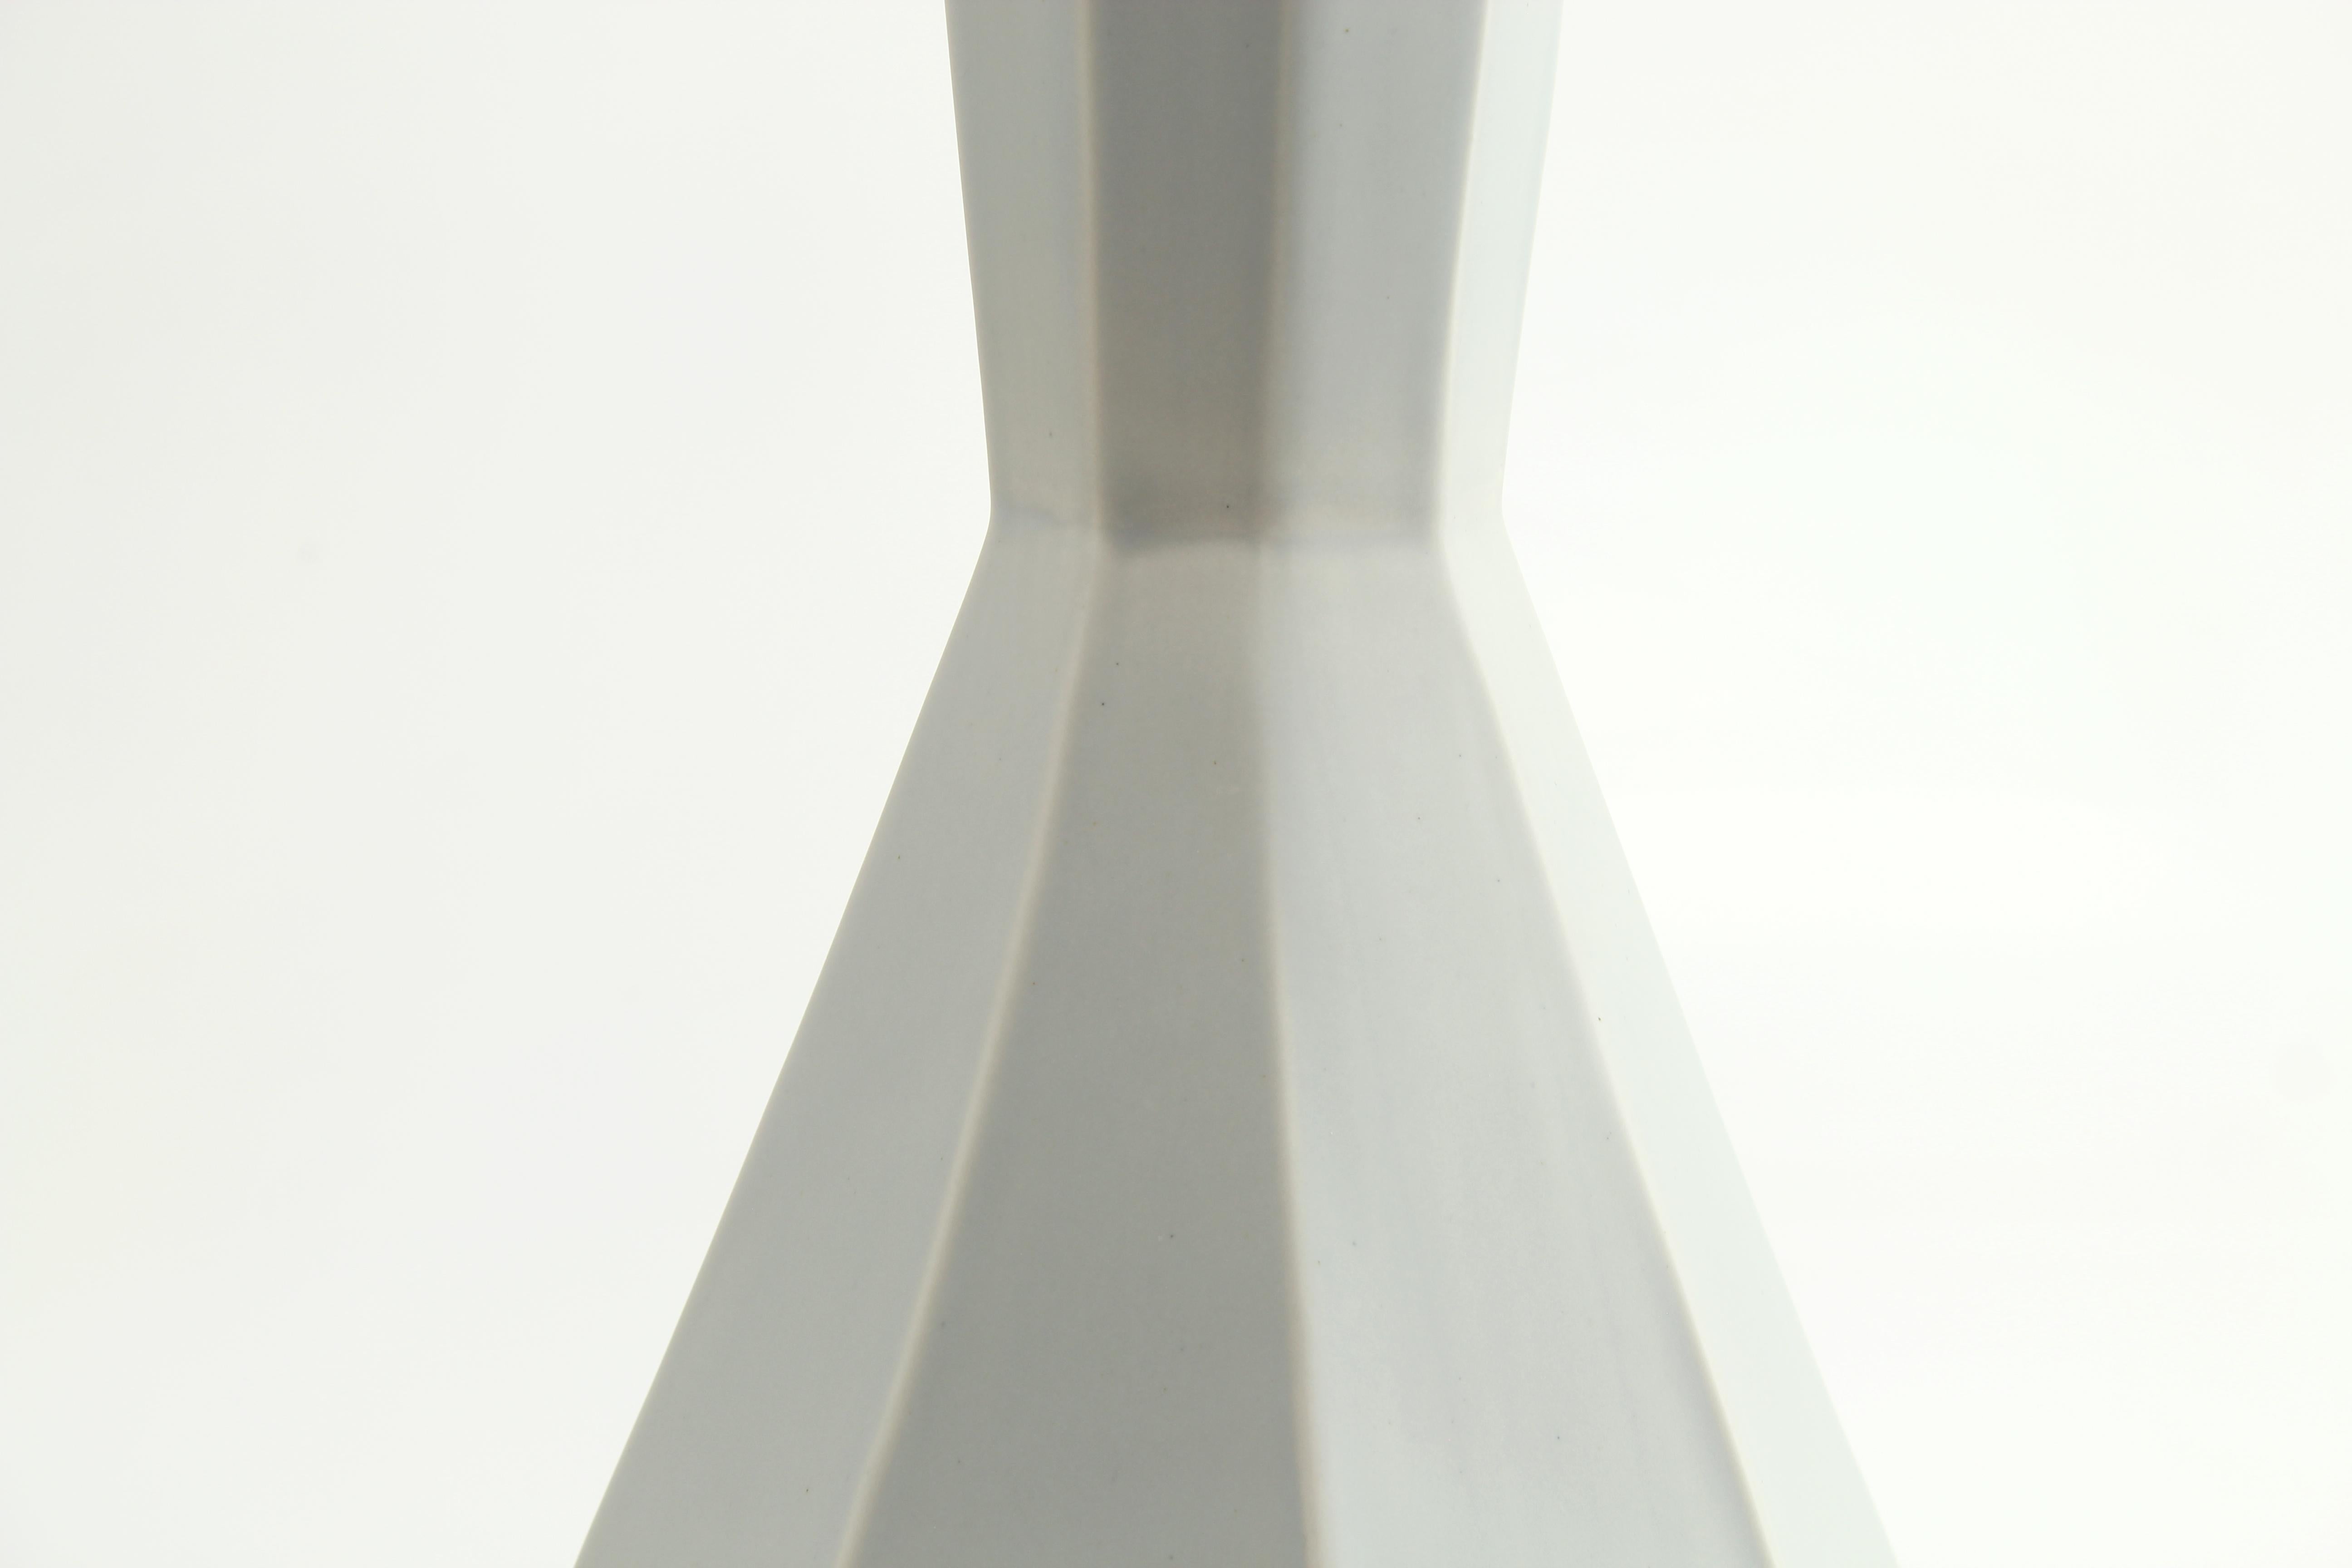 The clean, modern design of the geometric statement vase offers an updated, elegant look to your room with a Mid-Century Modern feel. This one of a kind piece features a matte grey glaze - soft to the touch and easy on the eyes. Add a large